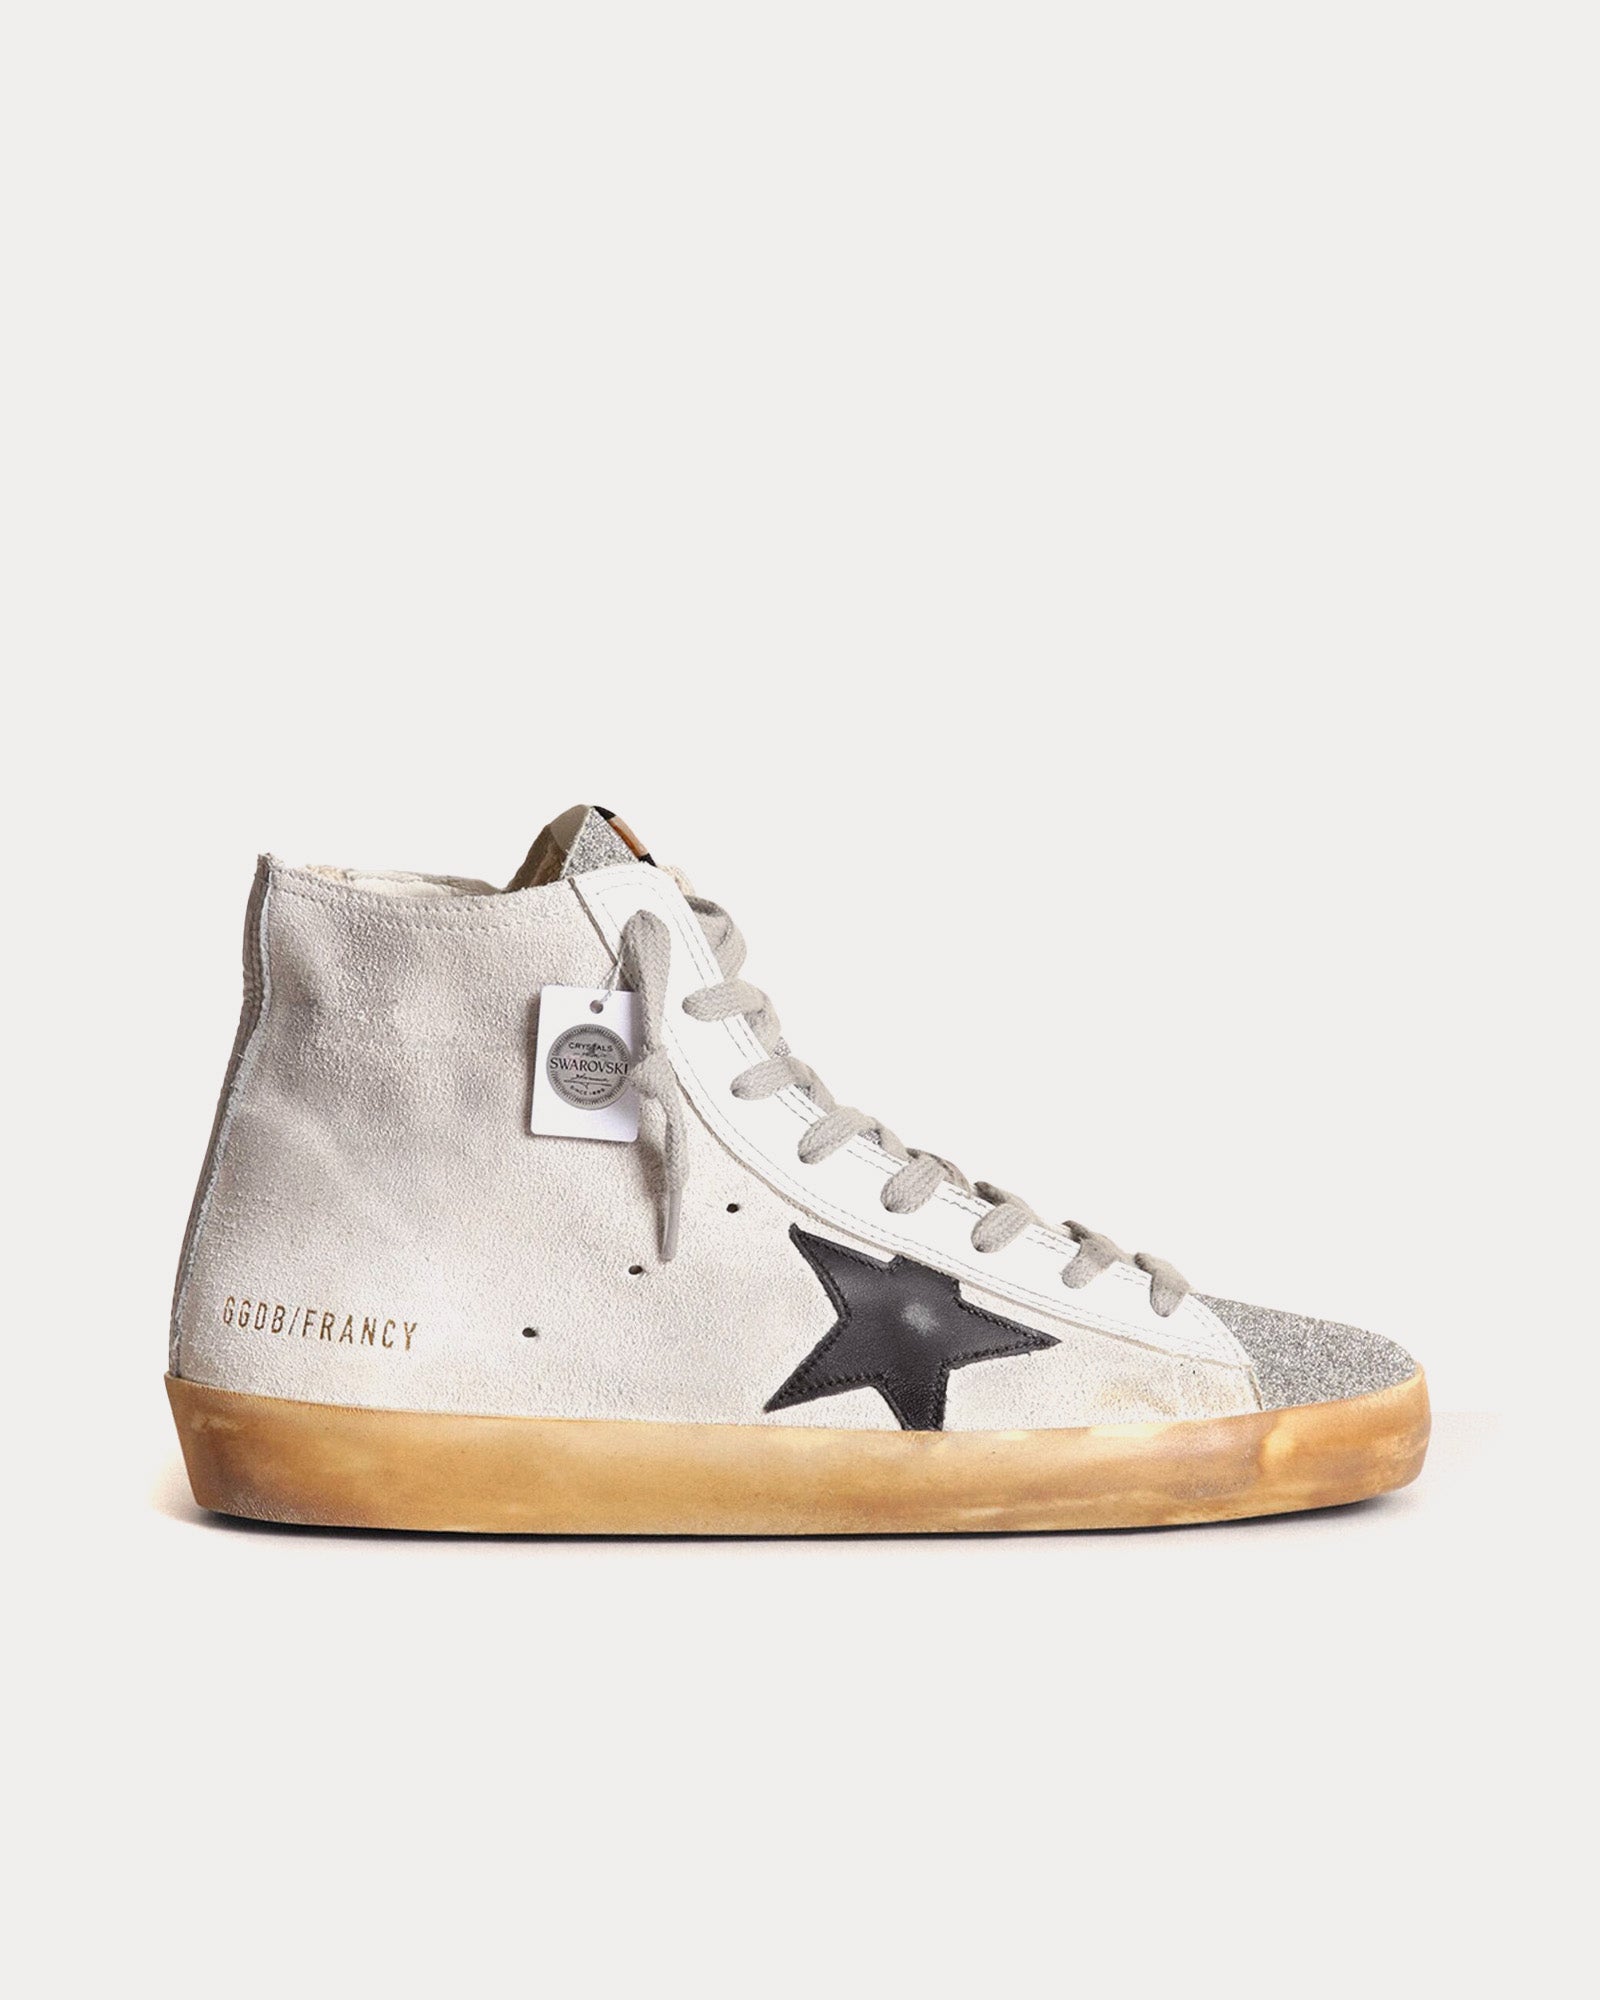 Golden Goose - Francy Suede & Leather Star White / Black High Top Sneakers